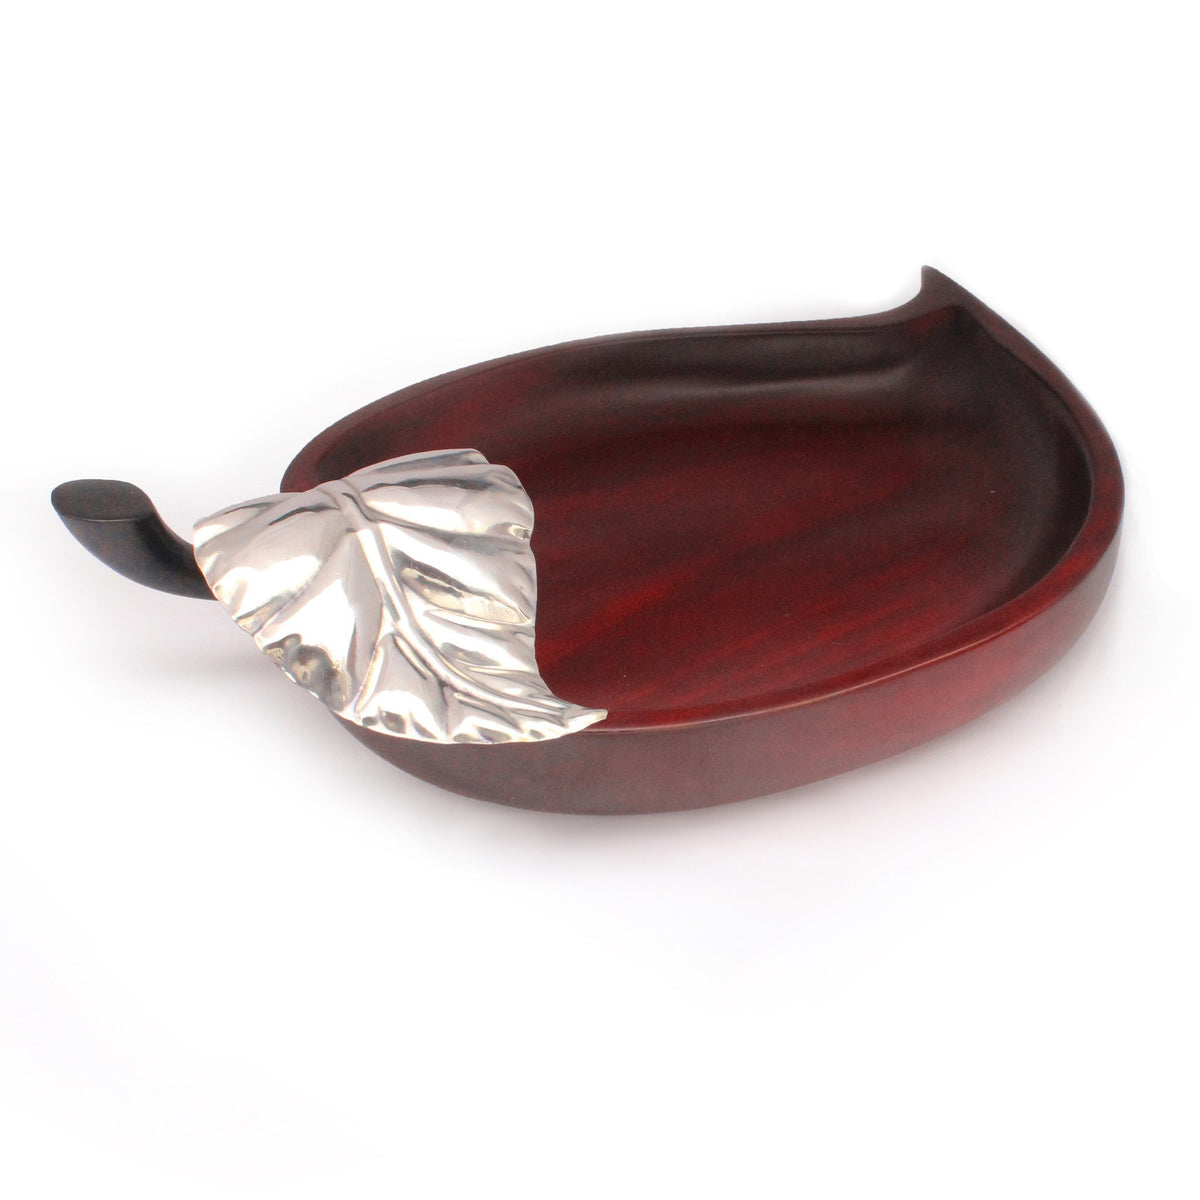 Mahogany Snack dish with Sterling Silver leaf - Qinti - The Peruvian Shop